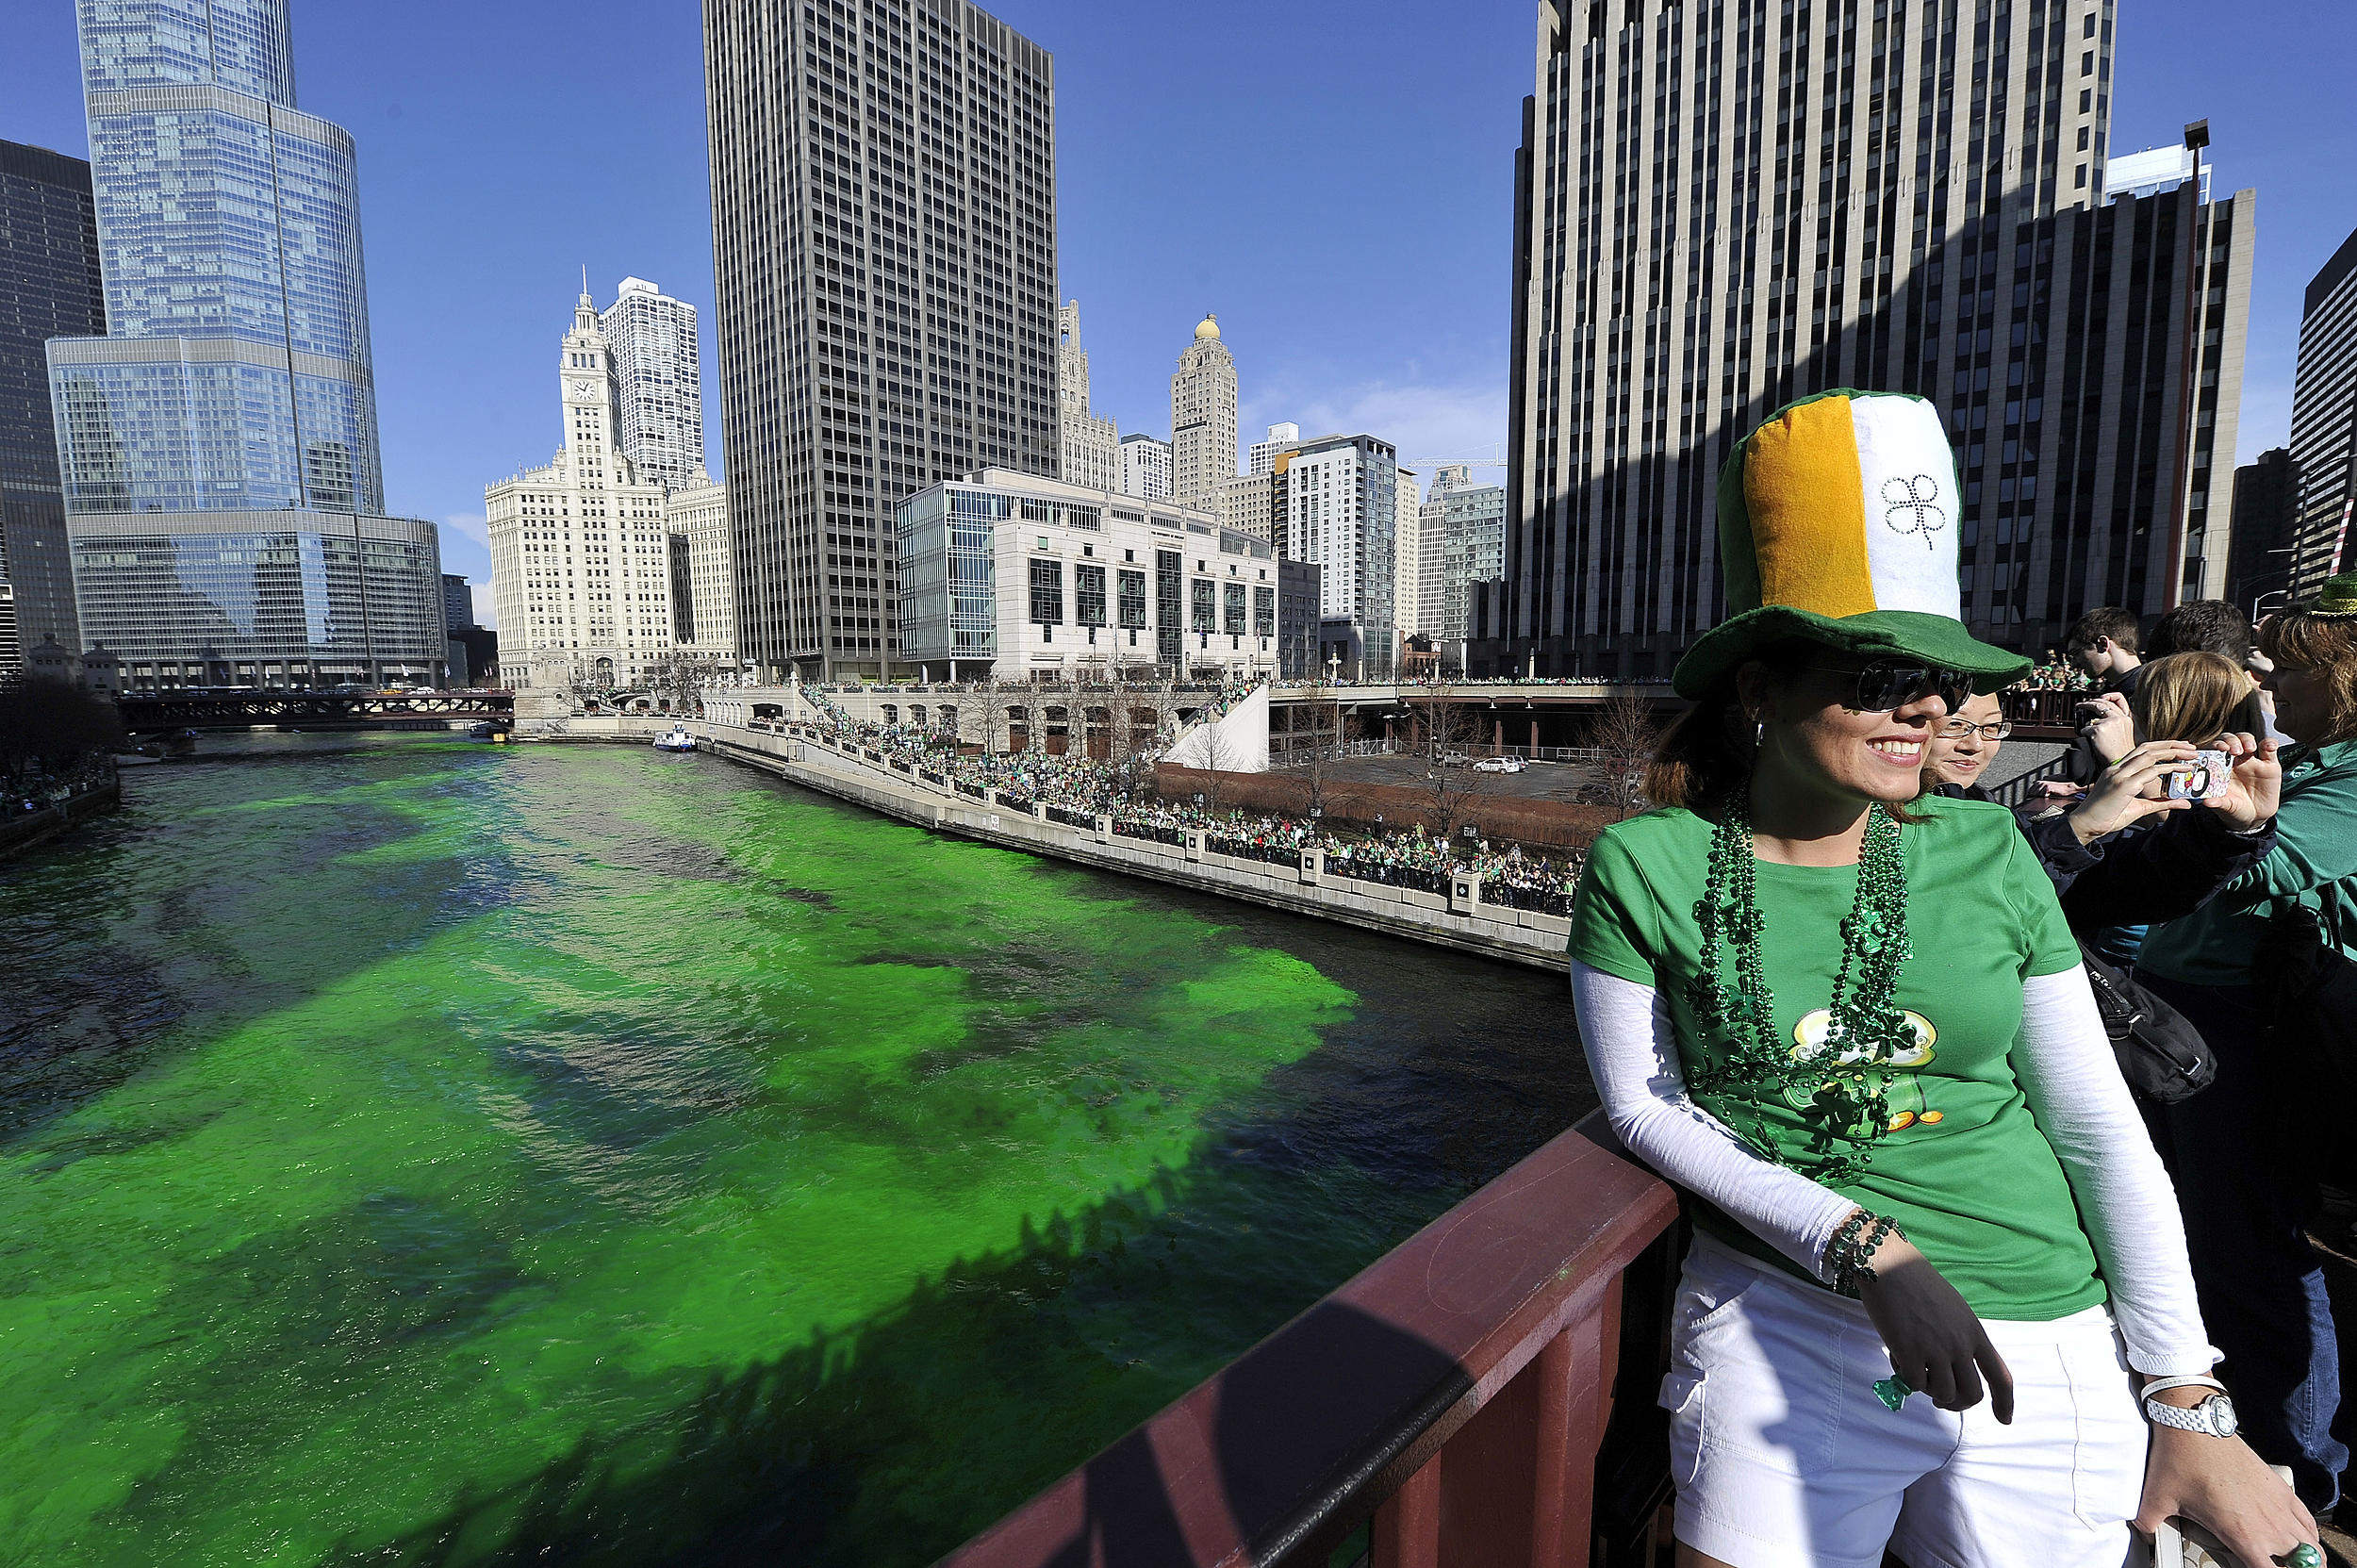 A look at some of the best St. Patrick's Day celebrations